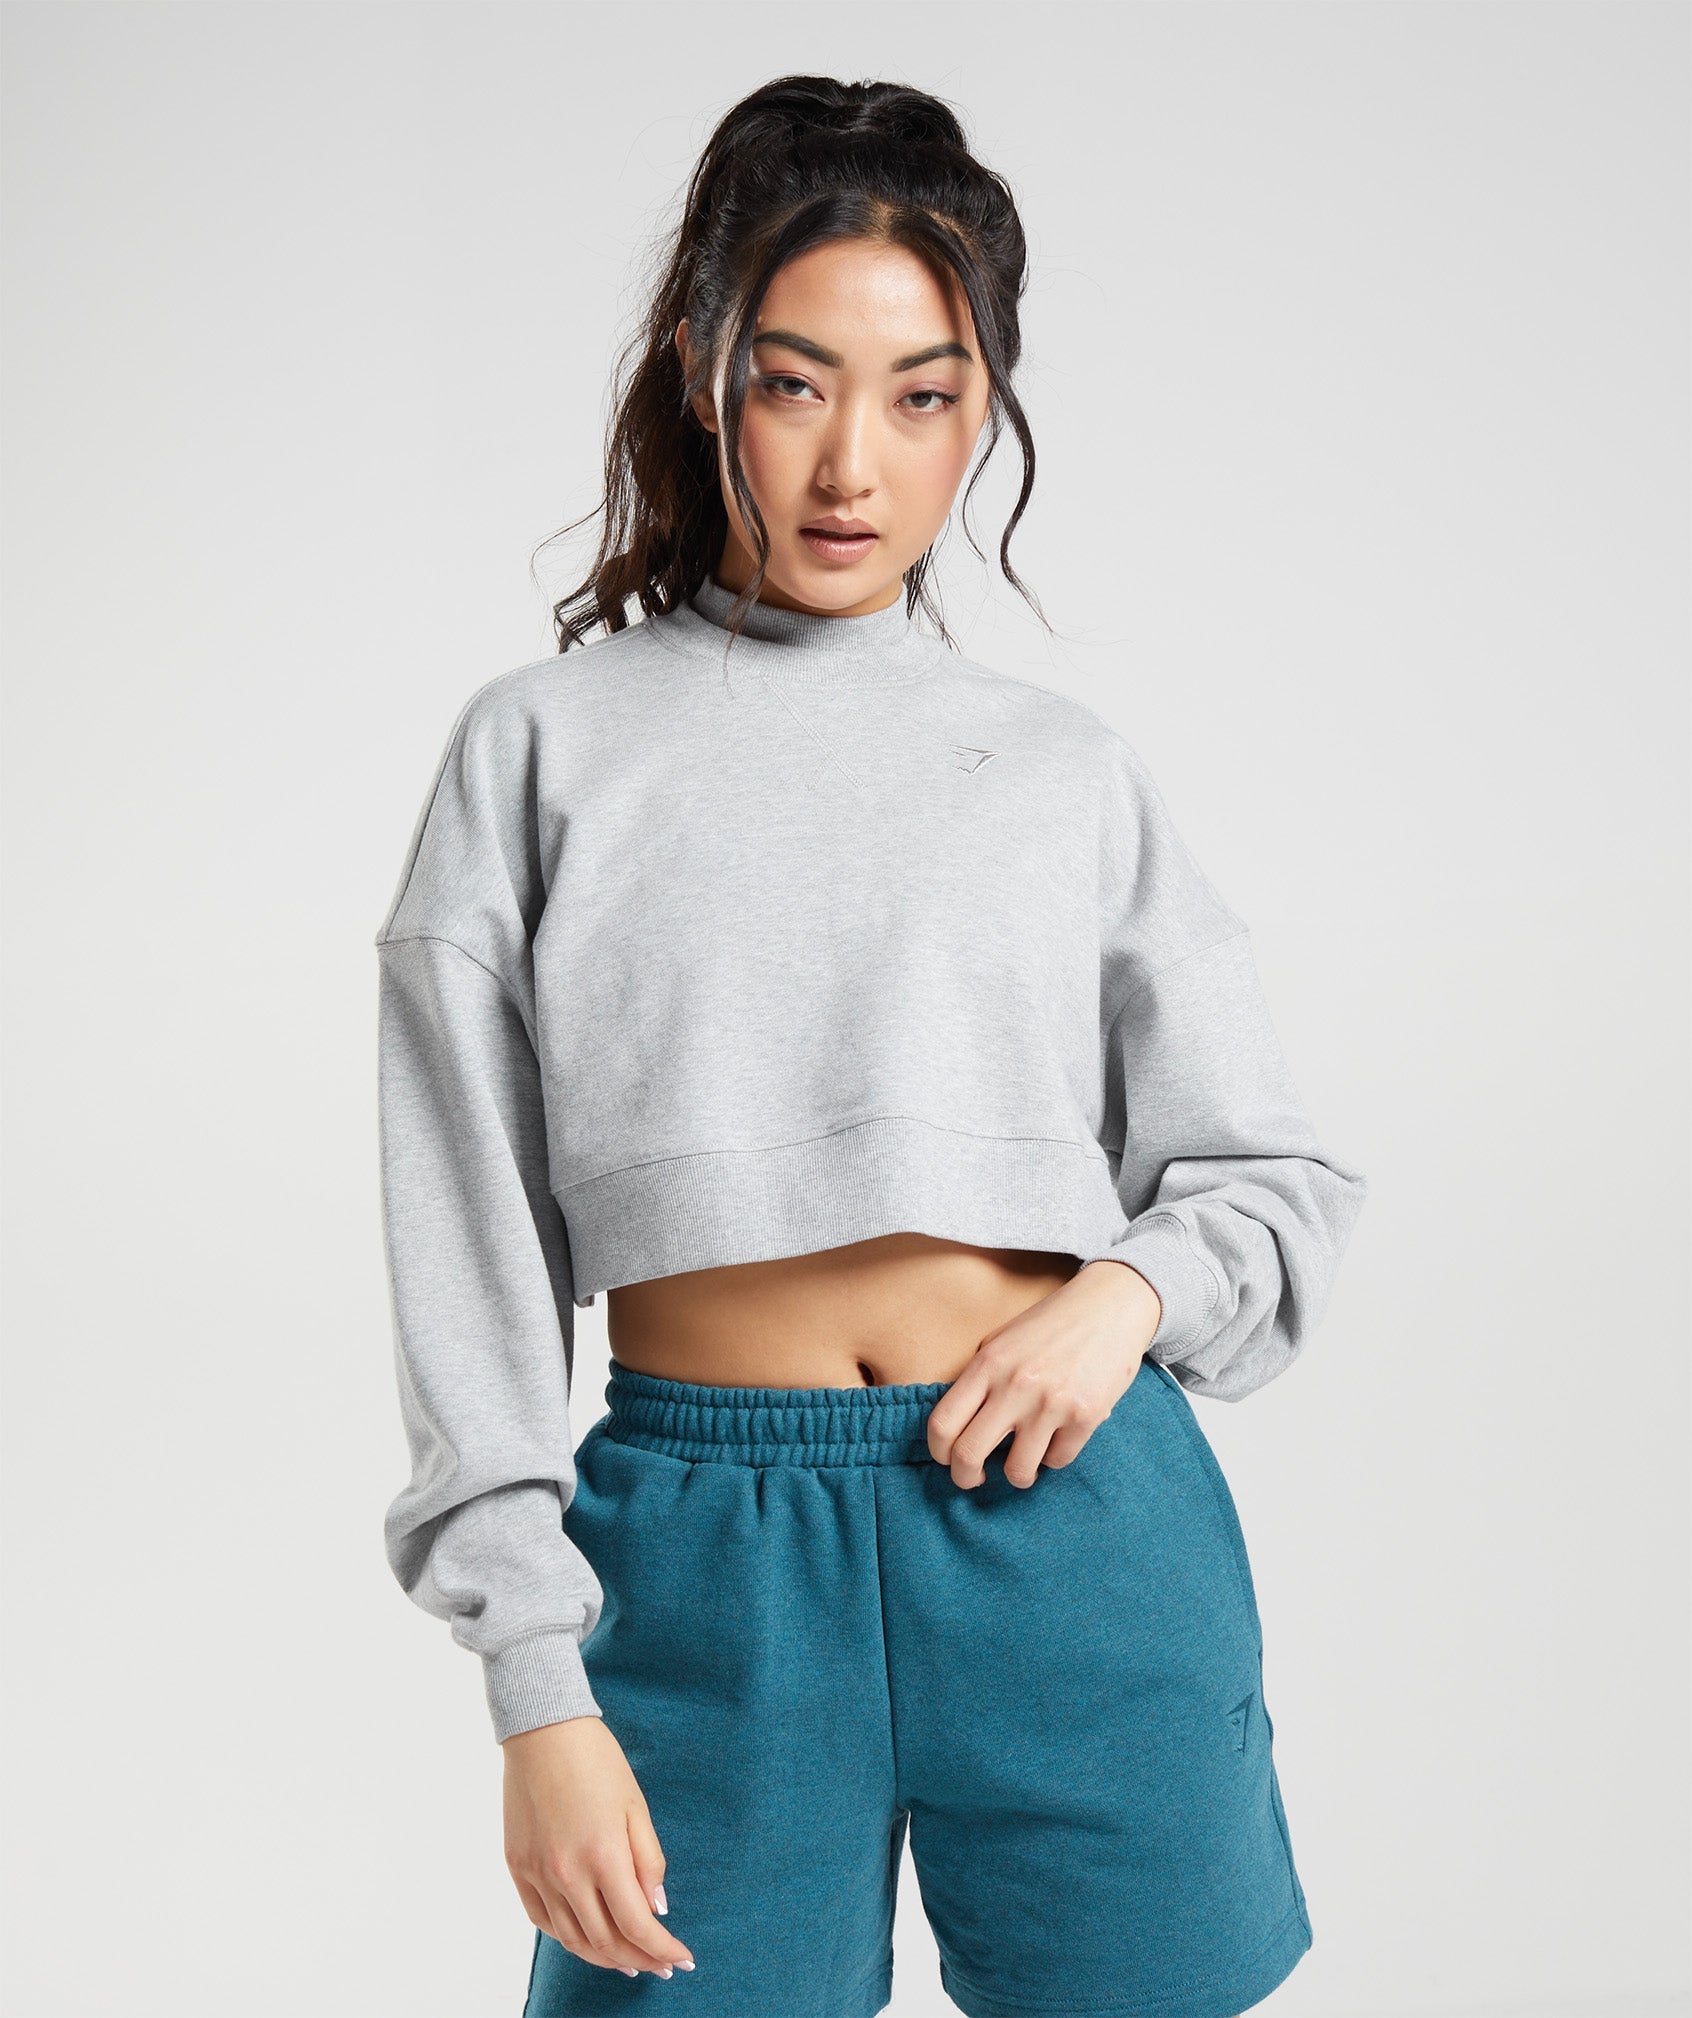 Rest Day Sweats Cropped Pullover in Light Grey Core Marl